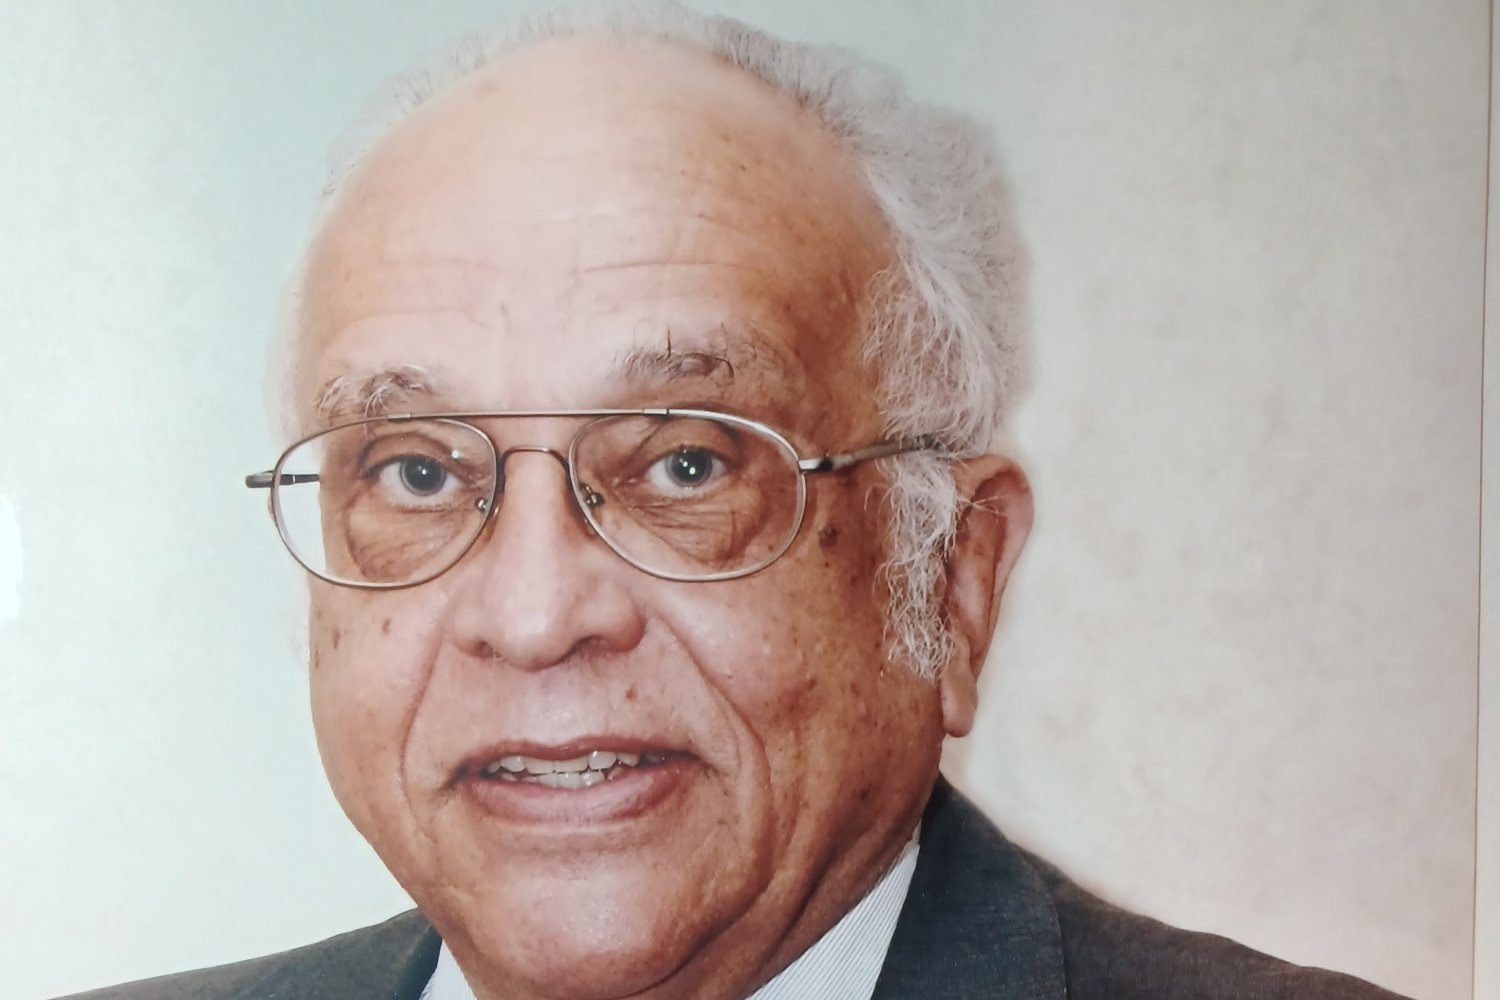 From his appointment in 1968 to his retirement in 1992, Professor Frank S. Jones focused on issues of race, poverty, and inequality, using his position to advocate for the expanded presence of people of color at the Institute. 